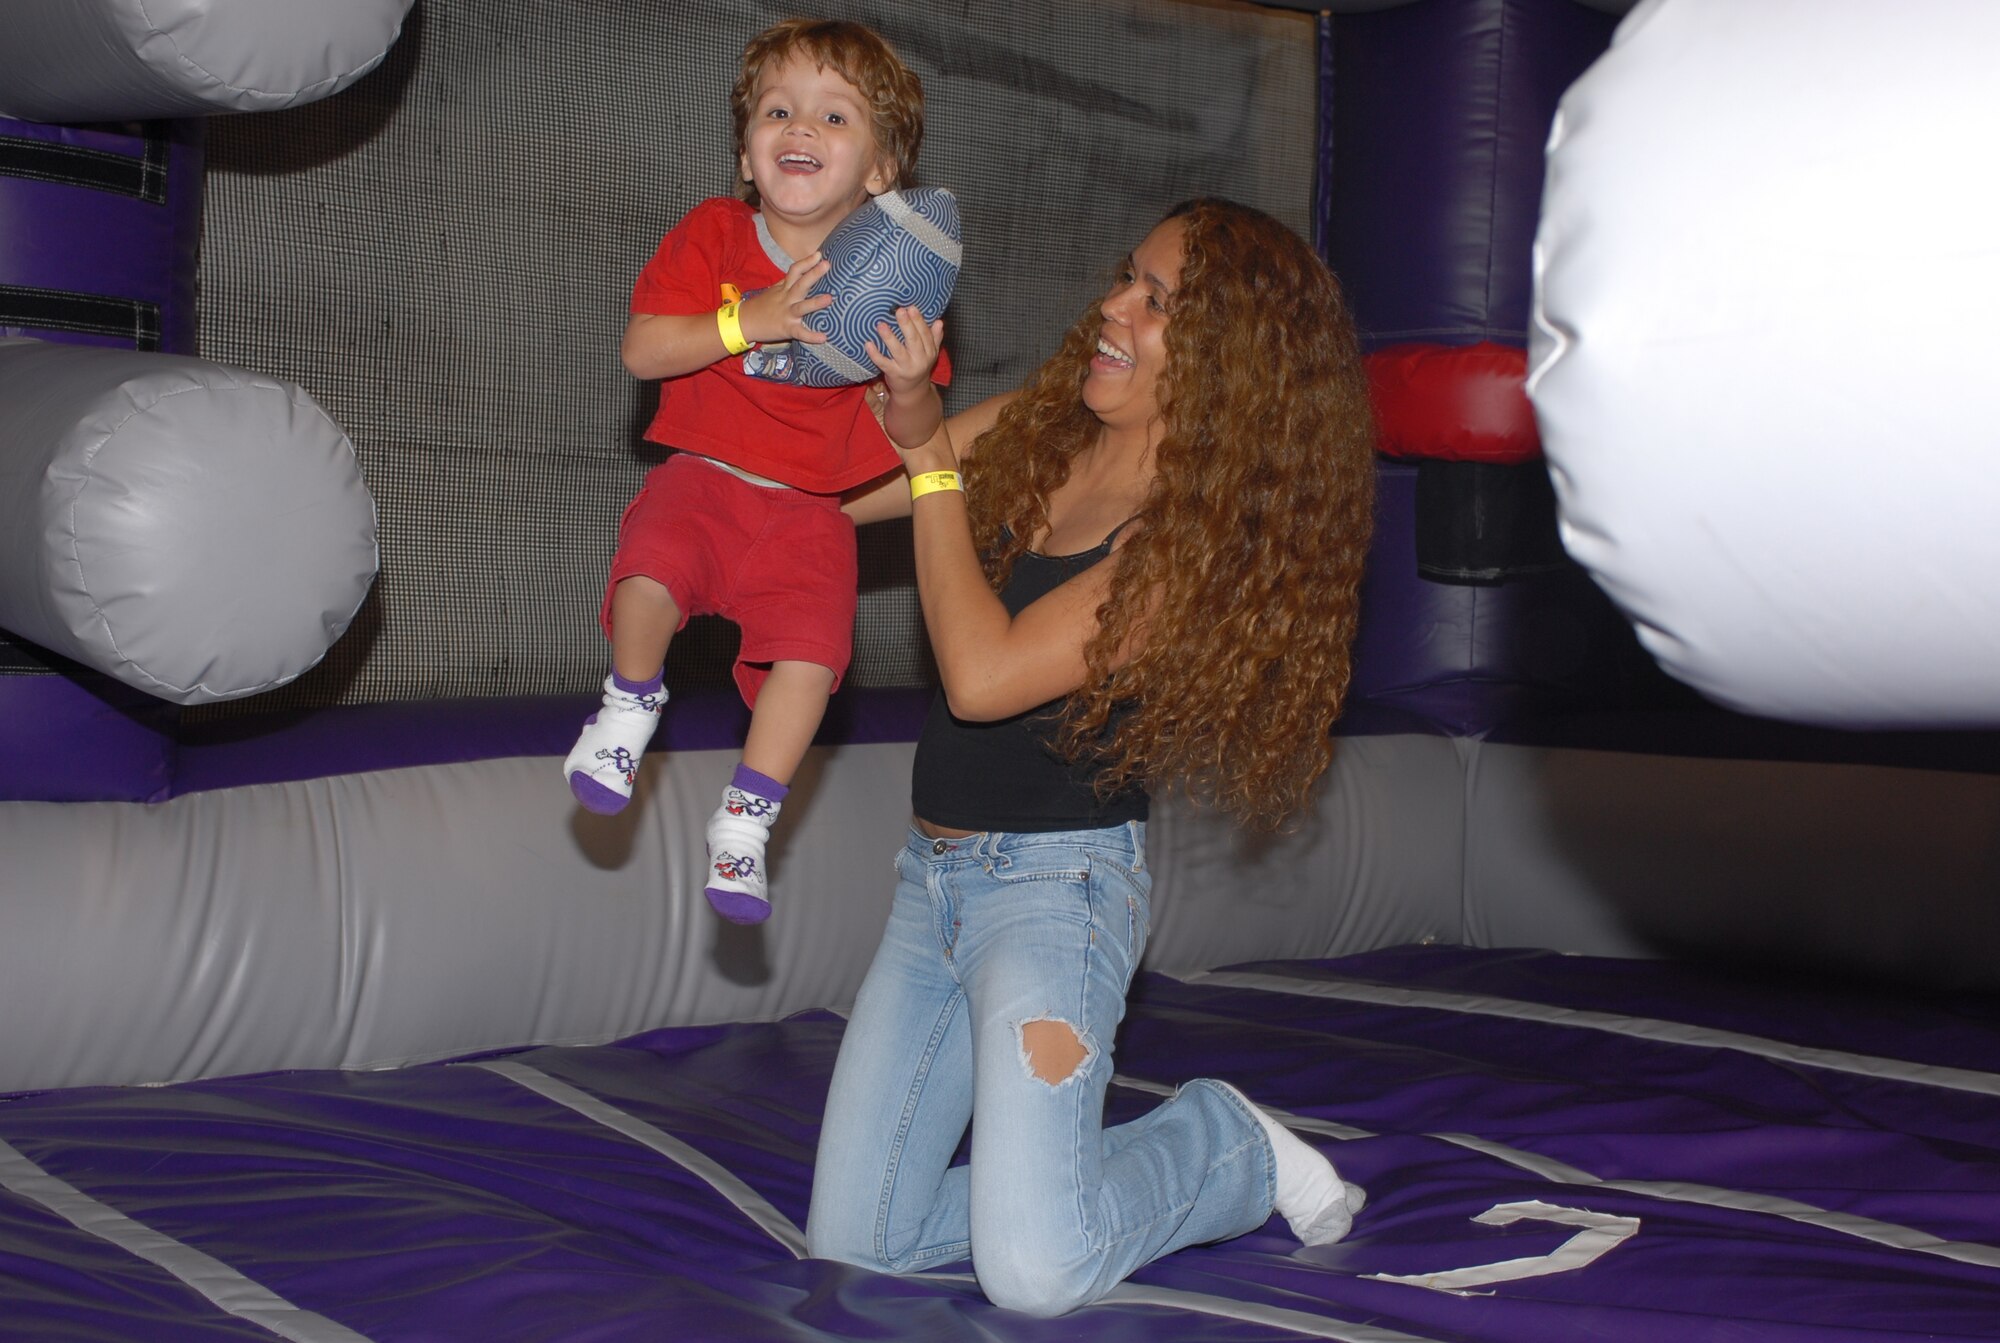 Emilio Munoz, 2, and his mother, Lydia, share a good time at the July 21 Hearts Apart meeting held at Bounce U in Goodyear, Ariz. (photo by Staff Sgt. Ian Dean)